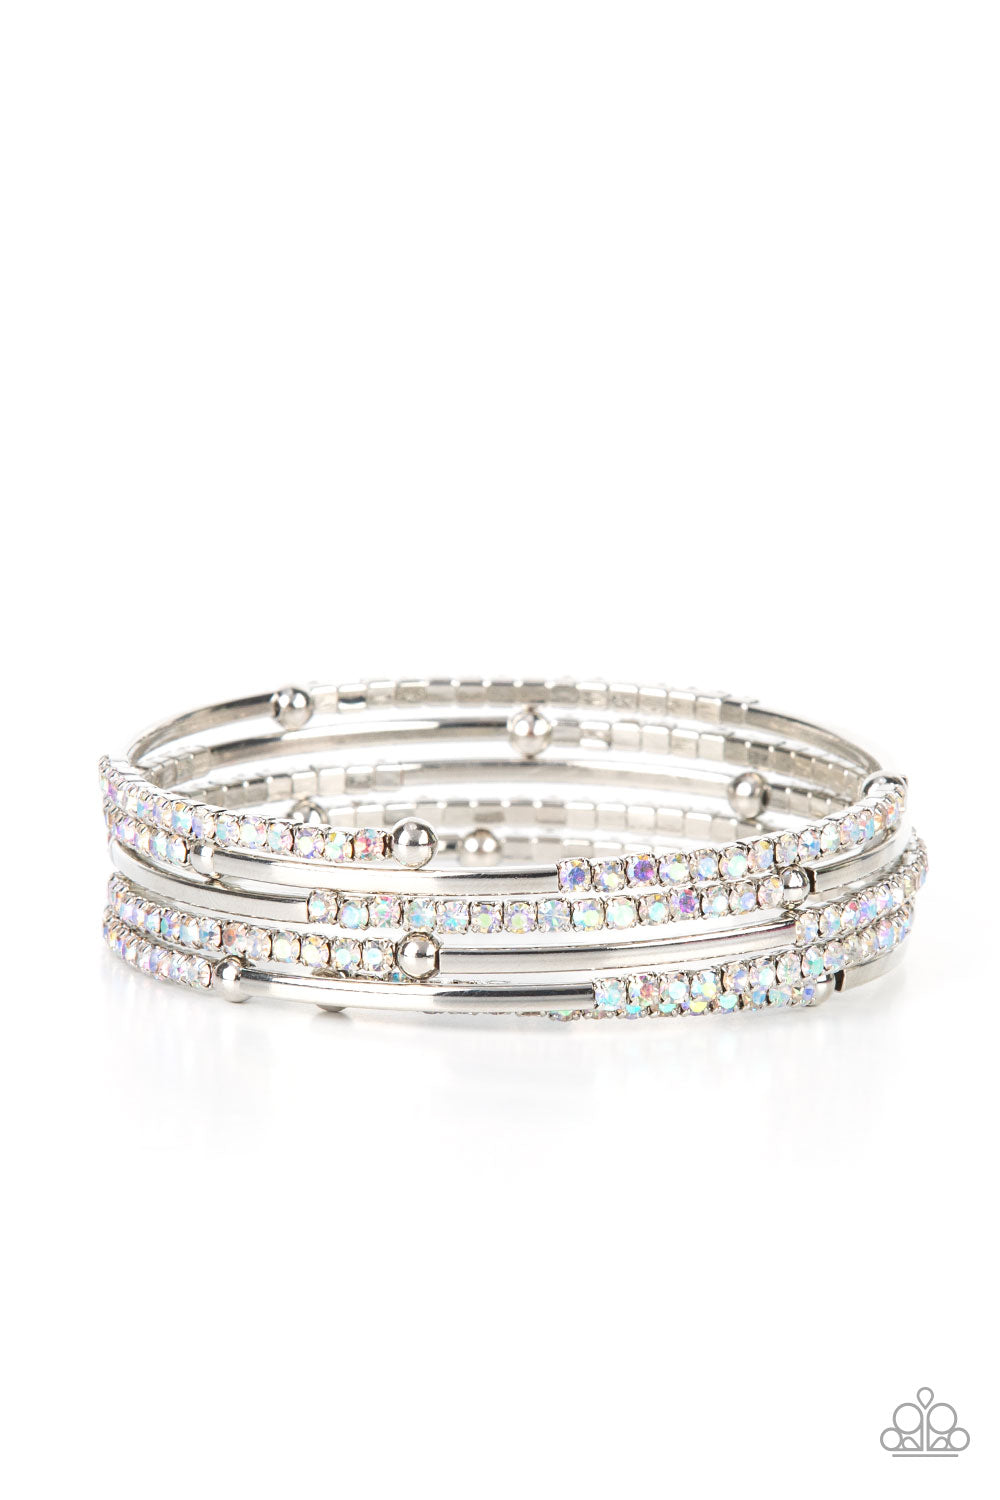 Camera Shy Simmer Multi Iridescent Bracelet - Paparazzi Accessories  A dainty infinity style bracelet is infused with glittery rows of iridescent rhinestones and curving silver frames, creating simmering layers around the wrist.  All Paparazzi Accessories are lead free and nickel free!  Sold as one individual bracelet.